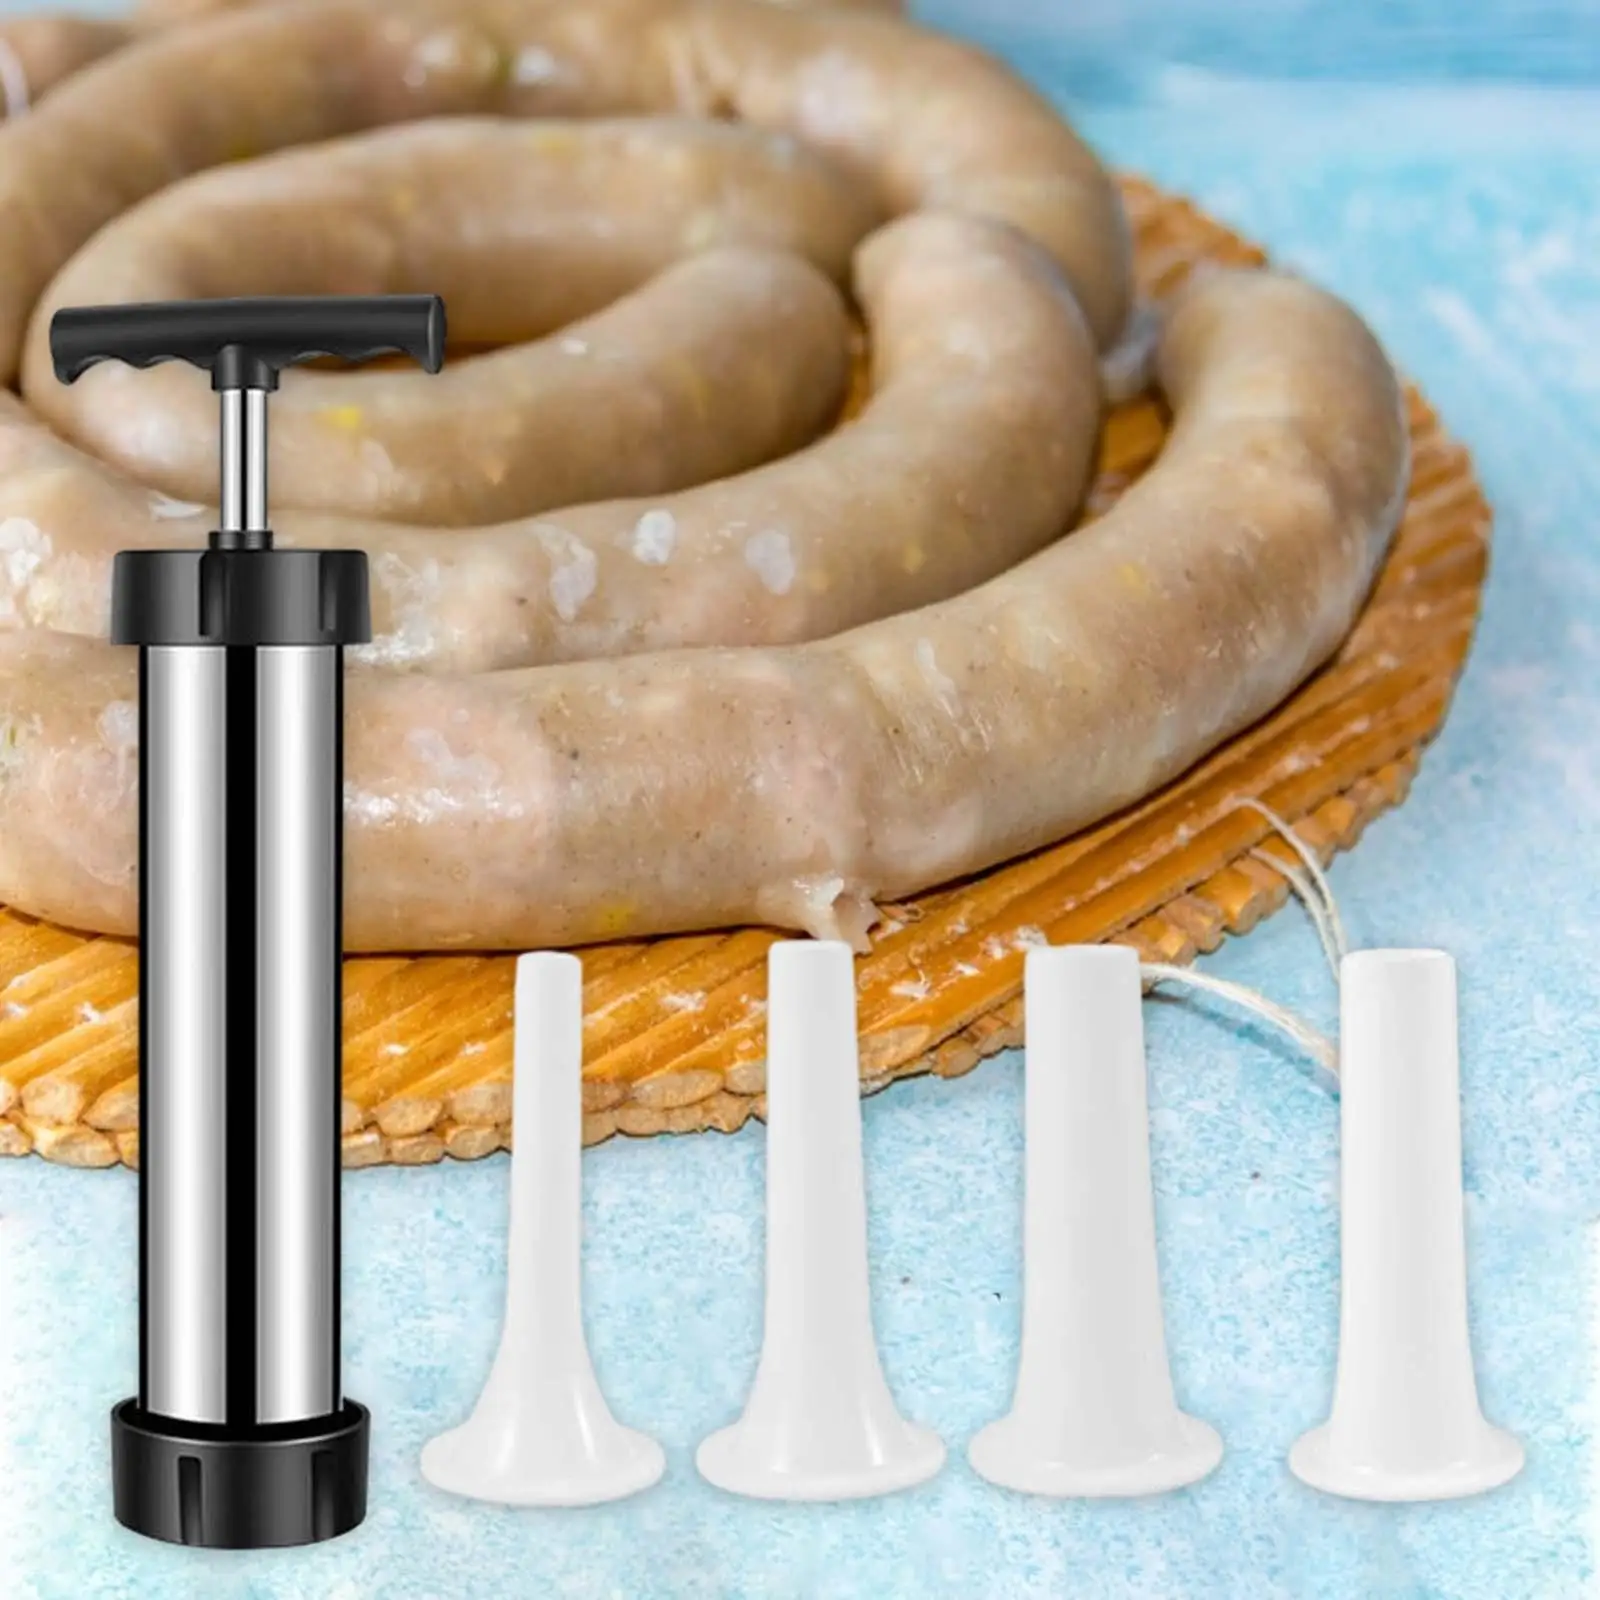 Sausage Stuffer Machine 4 Sausage Nozzle Attachments for Home with 4 Filling Nozzles Attachment Portable Meat Filling Machine